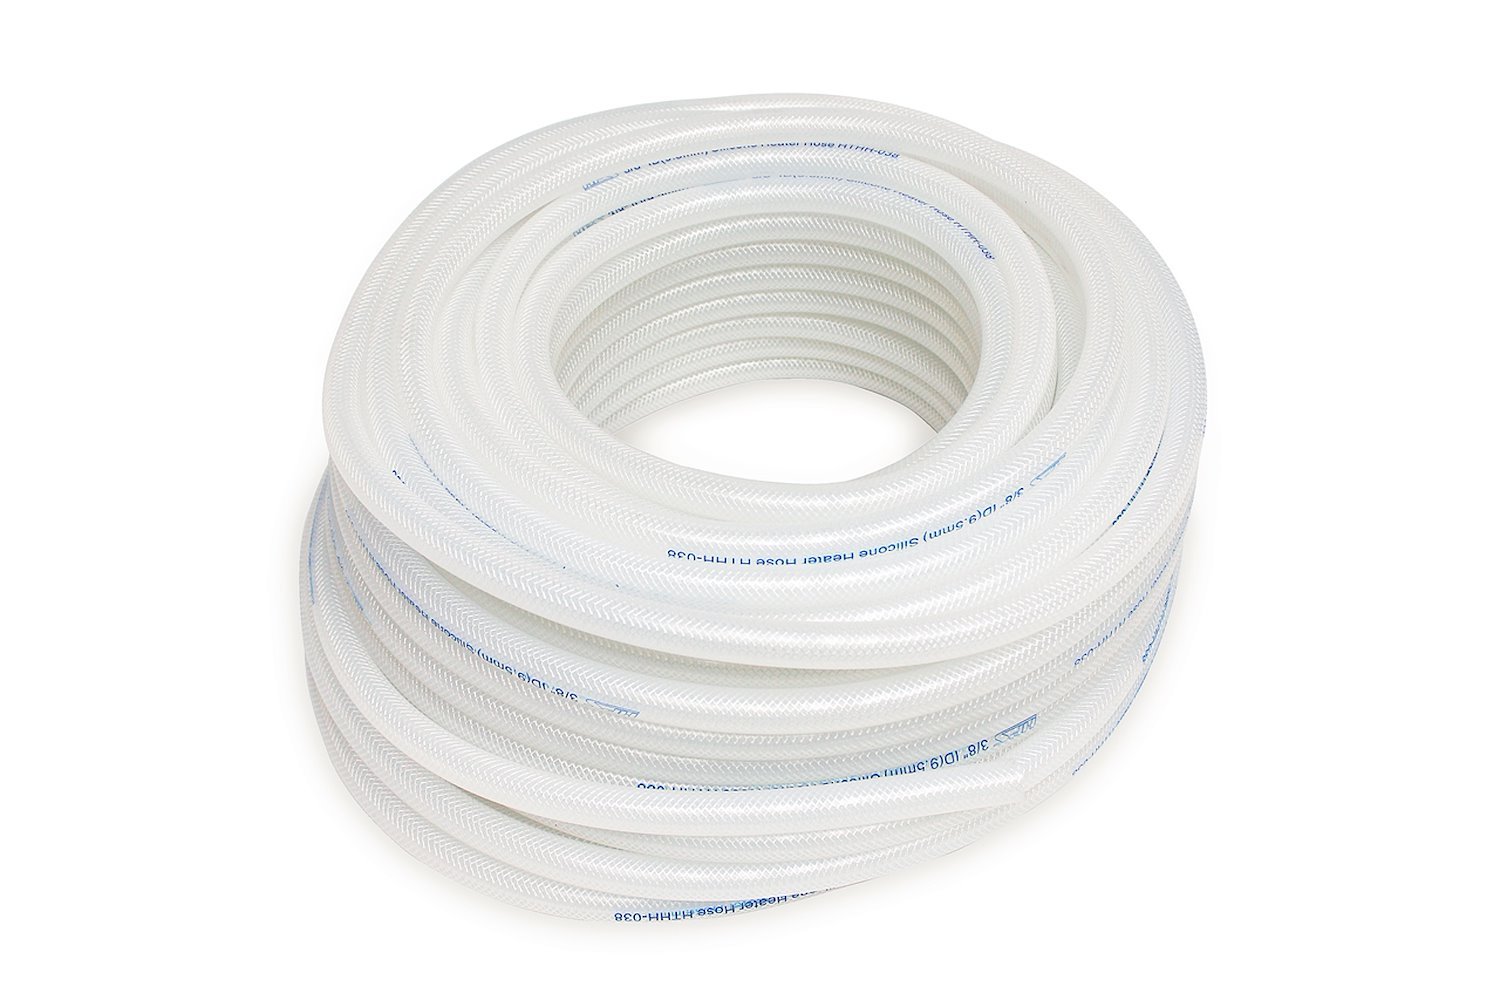 HTHH-100-CLEARx25 Silicone Heater Hose Tubing, High-Temp 1-Ply Reinforced, 1 in. ID, 25 ft. Roll, Clear